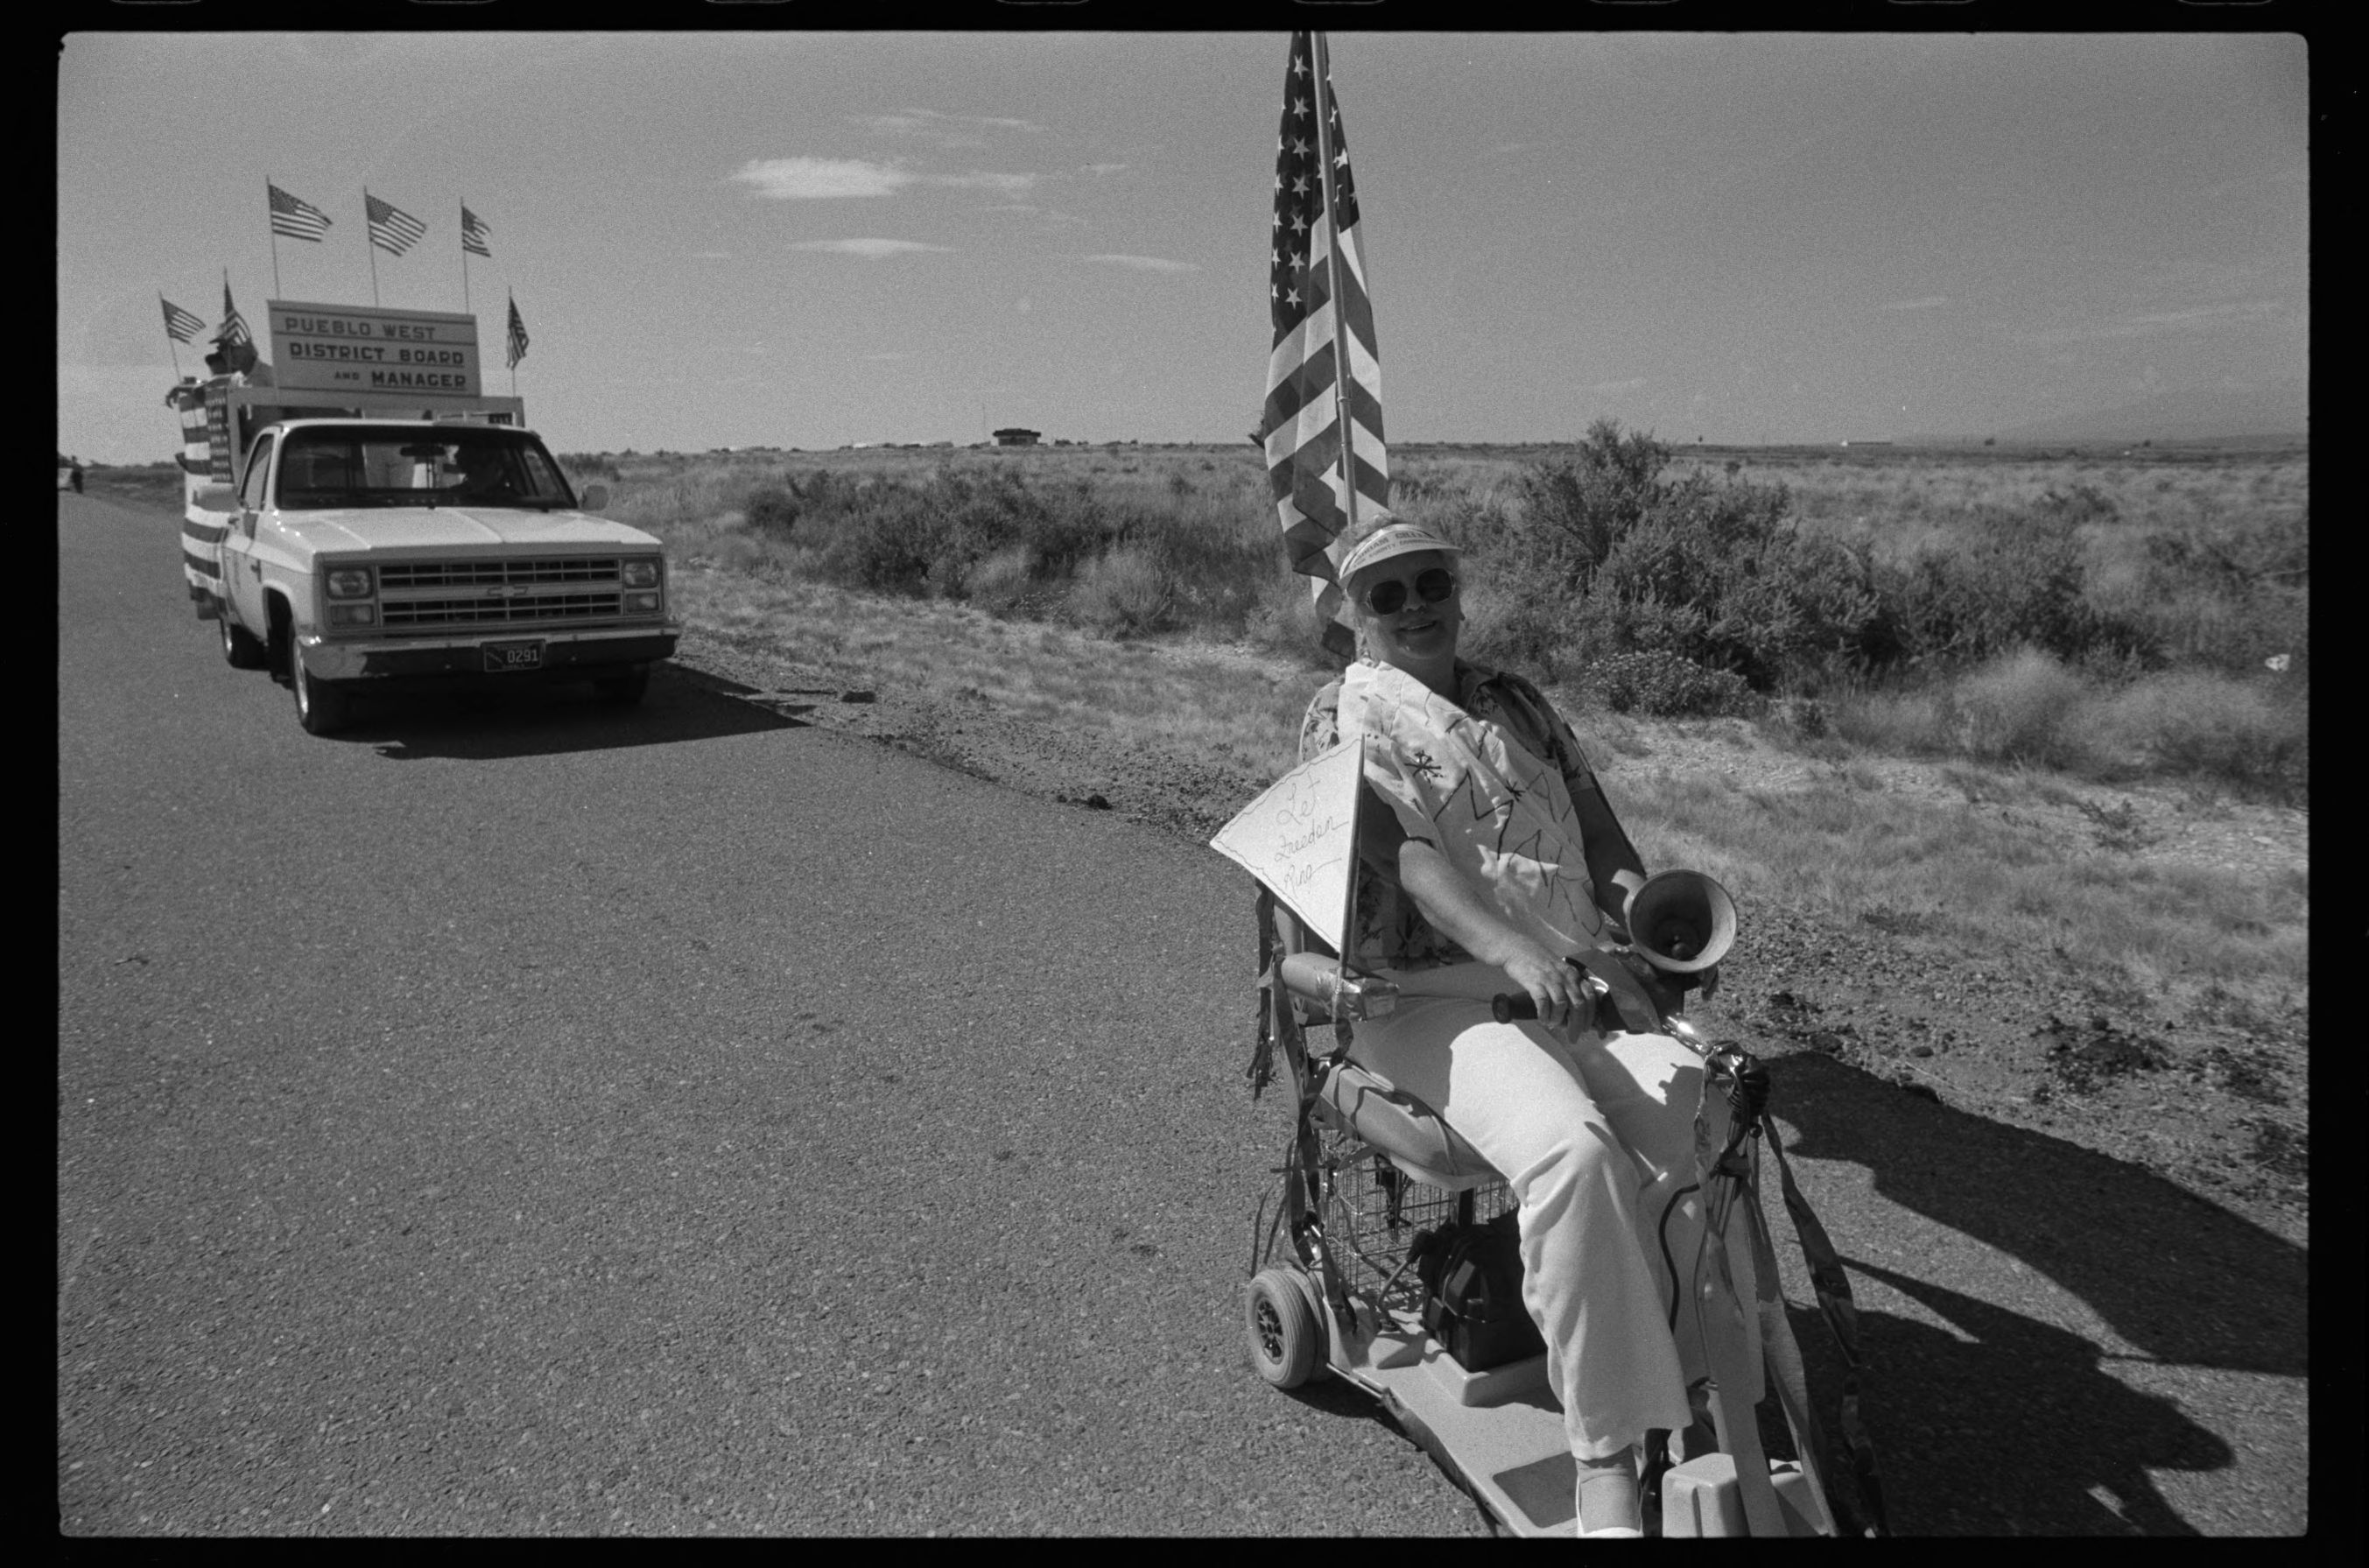 On an open road, a woman steers her motorized scooter, bullhorn on her lap, leading a pickup truck with many US flags driving behind.